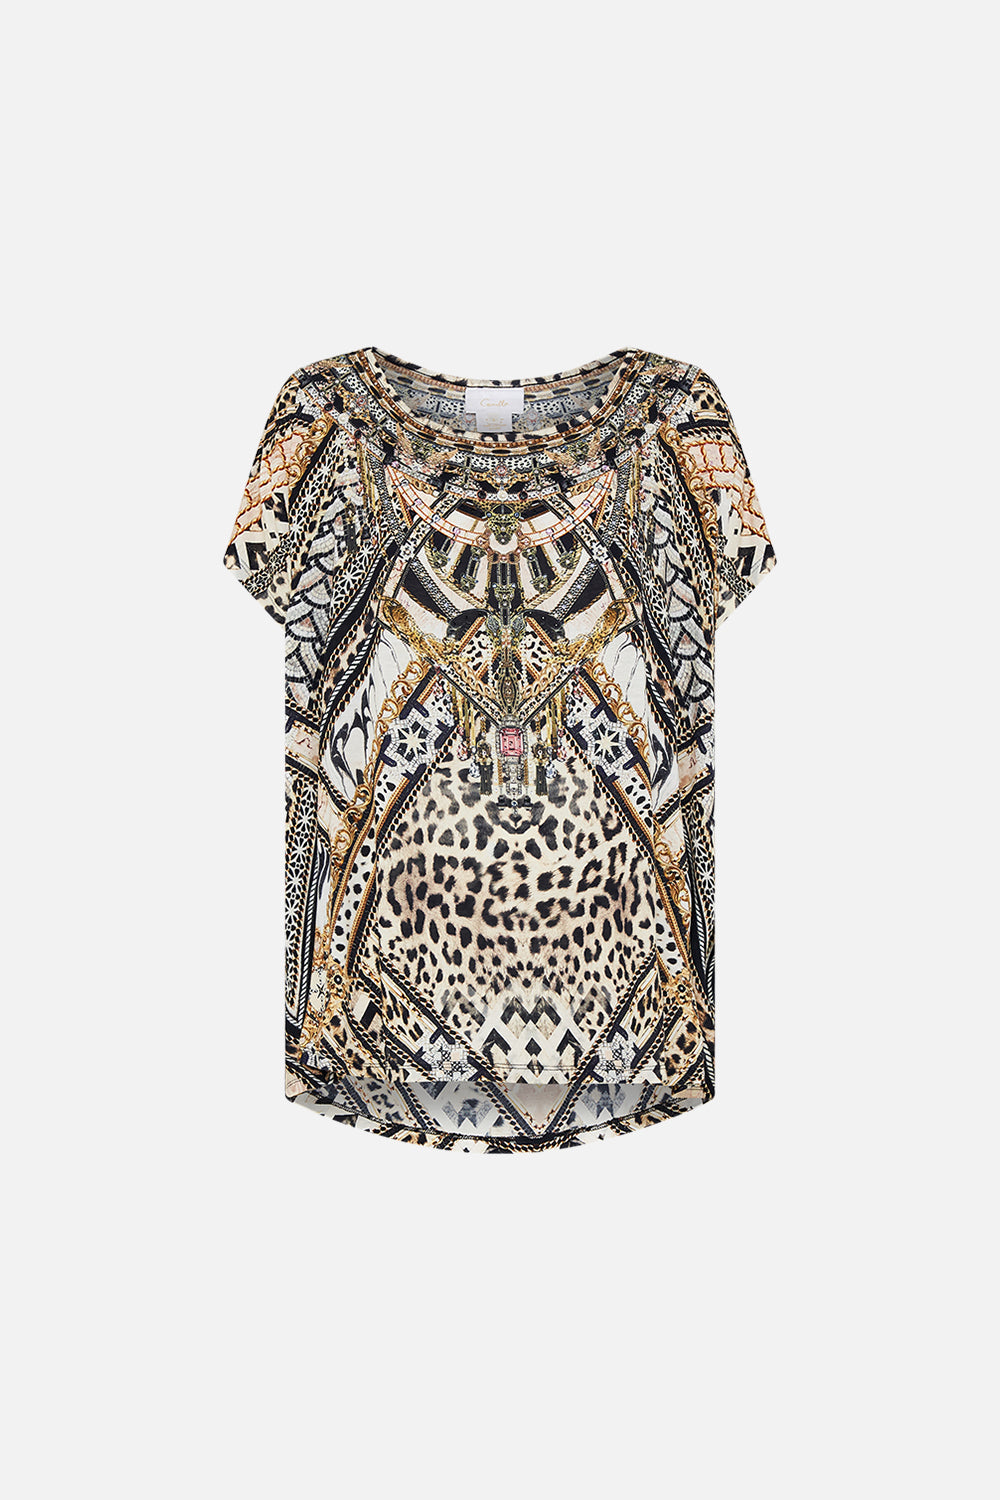 Product view of CAMILLA animal print tee in Mosaic Muse